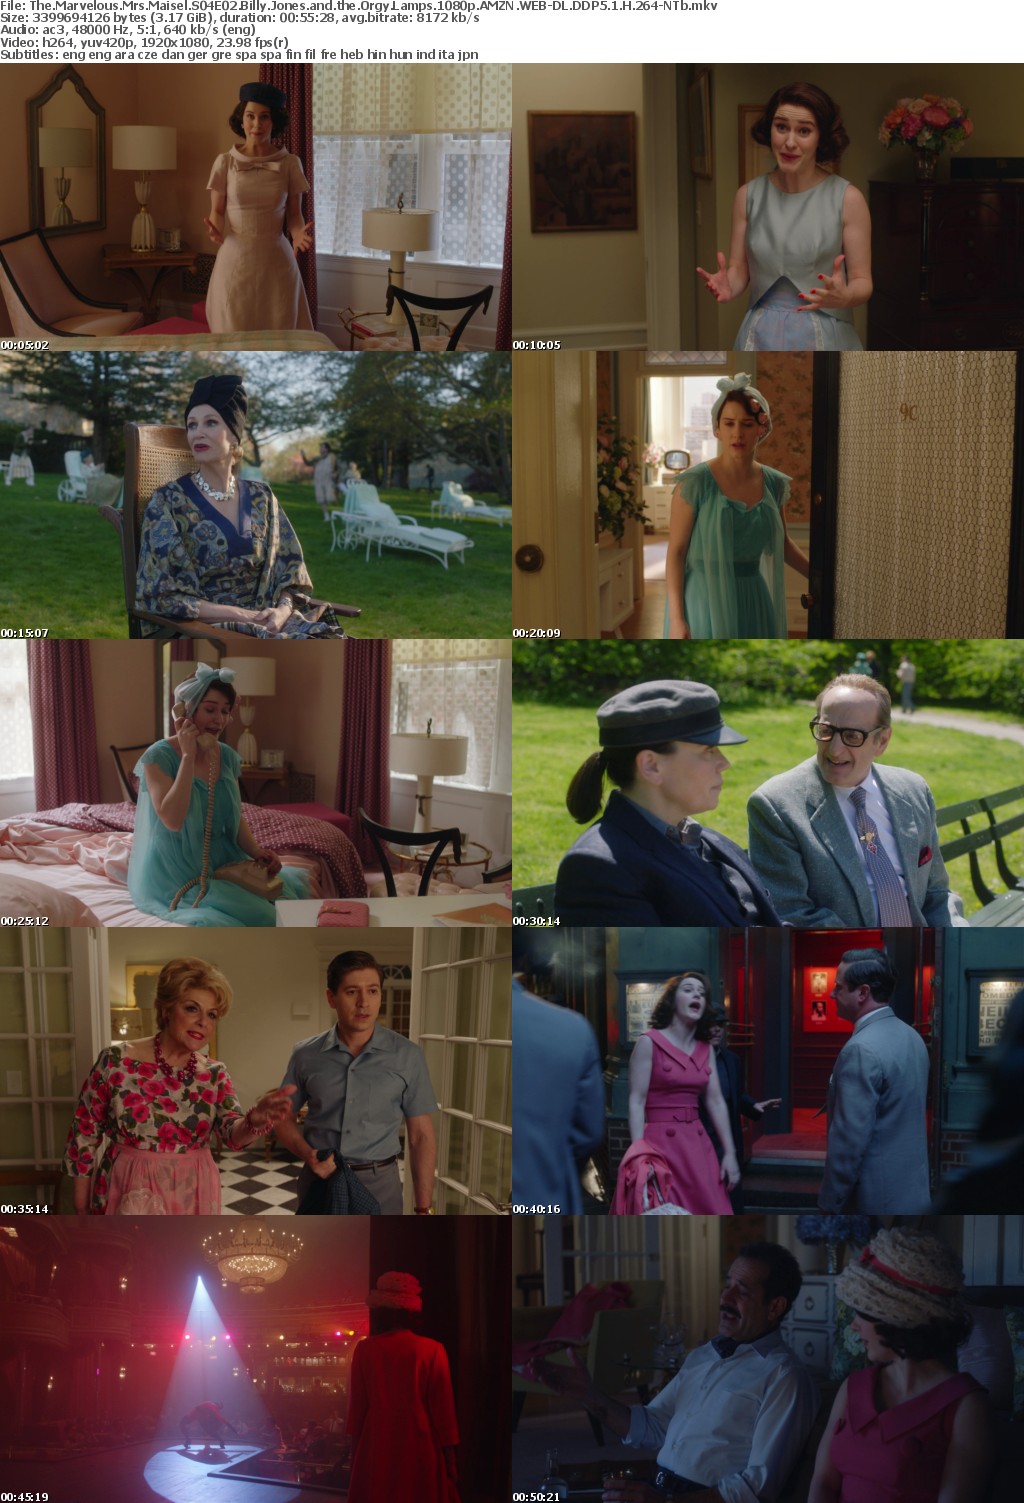 The Marvelous Mrs Maisel S04E02 Billy Jones and the Orgy Lamps 1080p AMZN WEBRip DDP5 1 x264-NTb